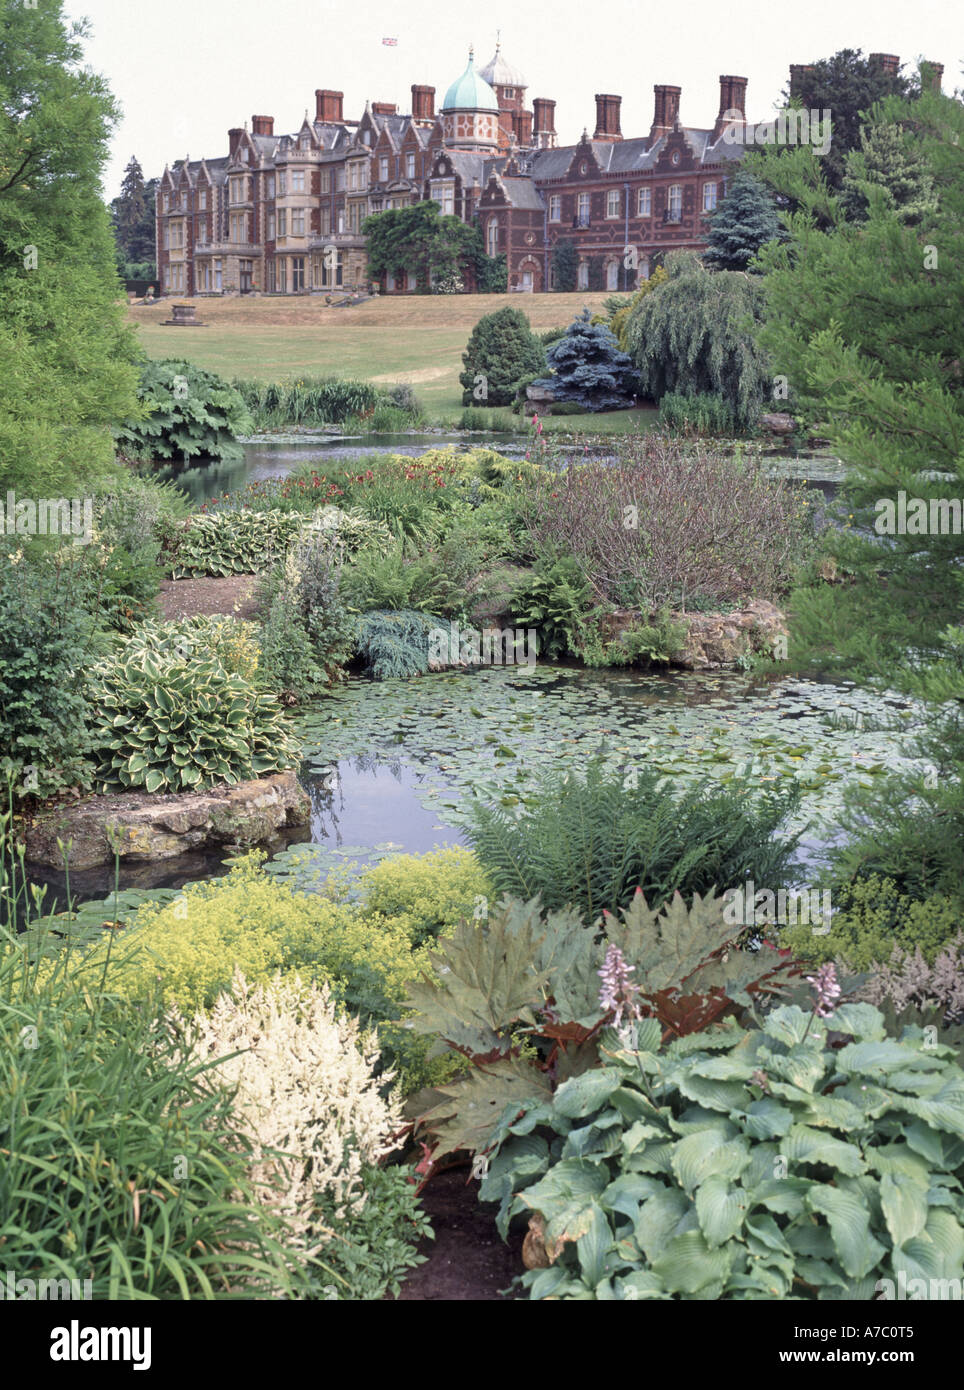 The rear elevation of The Royal Residence of Sandringham House and gardens with pond Stock Photo